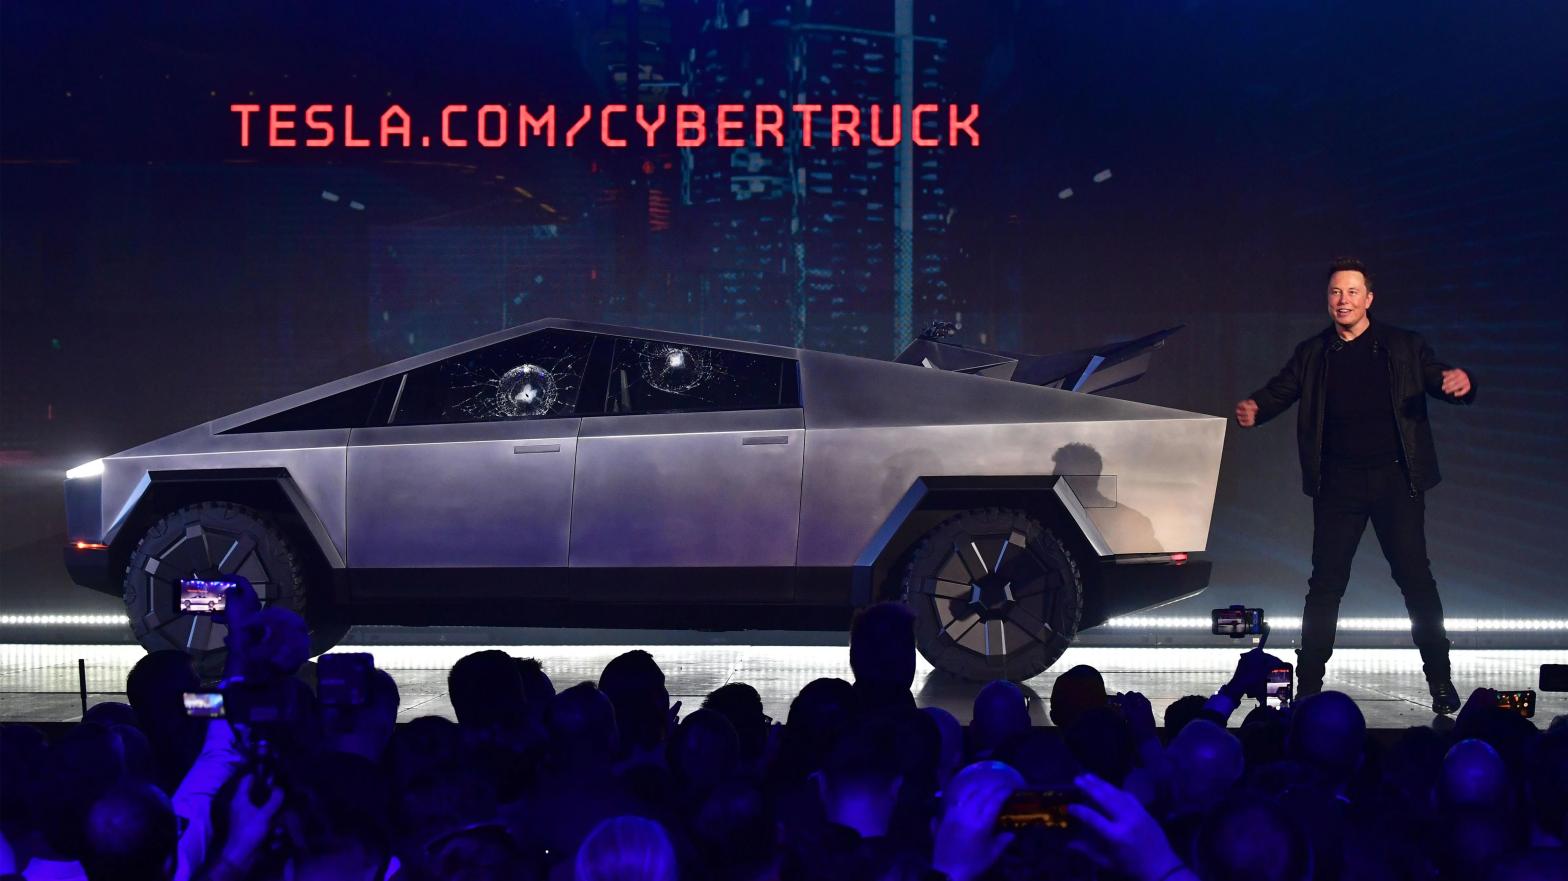 Slow Cybertruck Production Will Cost Tesla ‘Blood, Sweat and Tears’